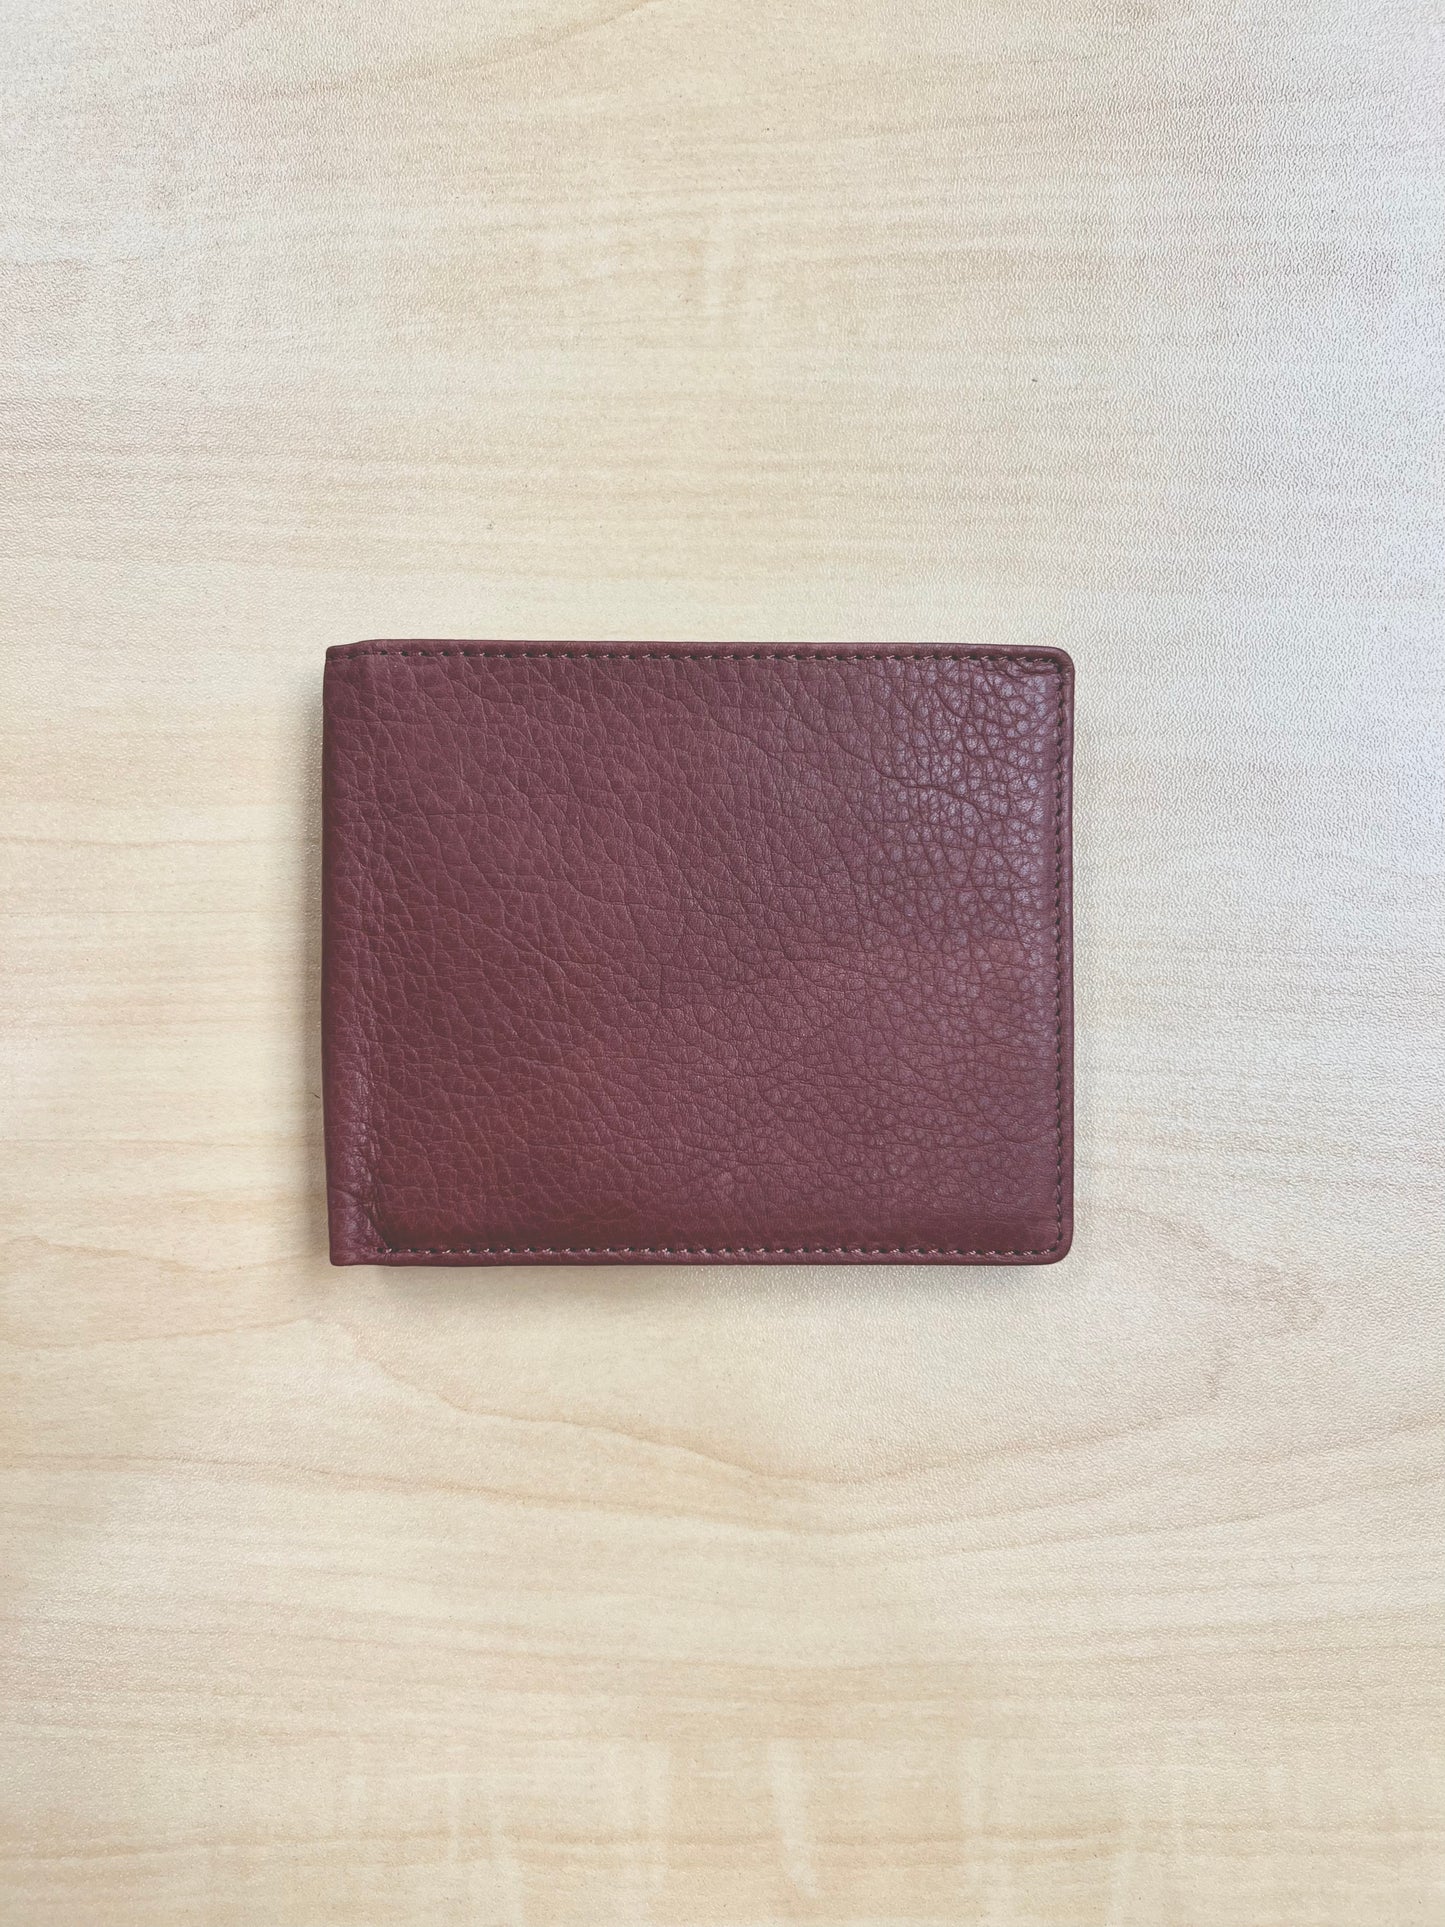 Osgoode Marley anti-RFID ID Thinfold Leather Bifold Wallet- 1231